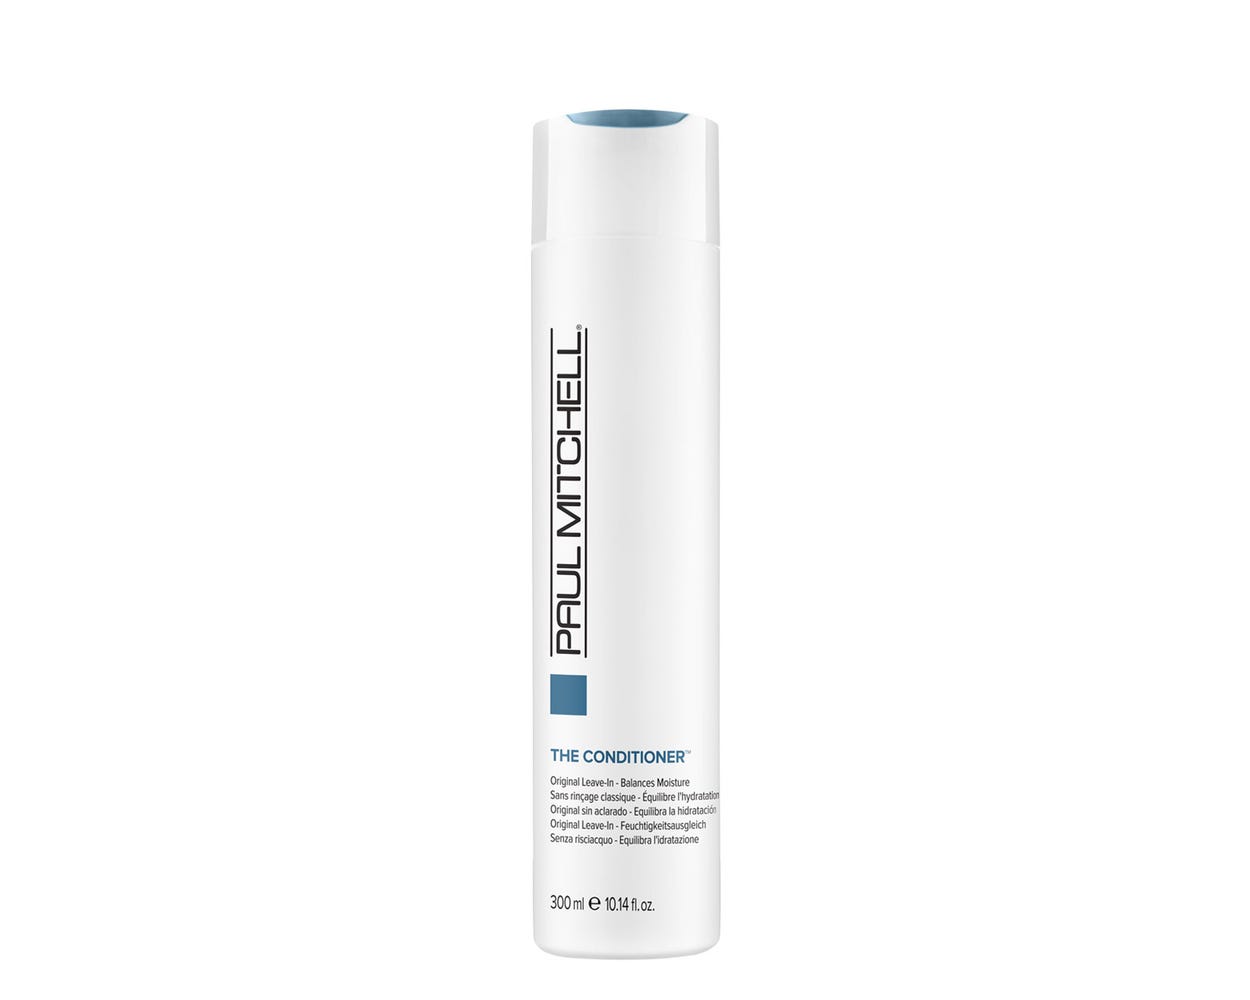 Paul Mitchell The Conditioner Original Leave-In, Balances Moisture, For All Hair Types 10.14 Fl Oz (Pack of 1)